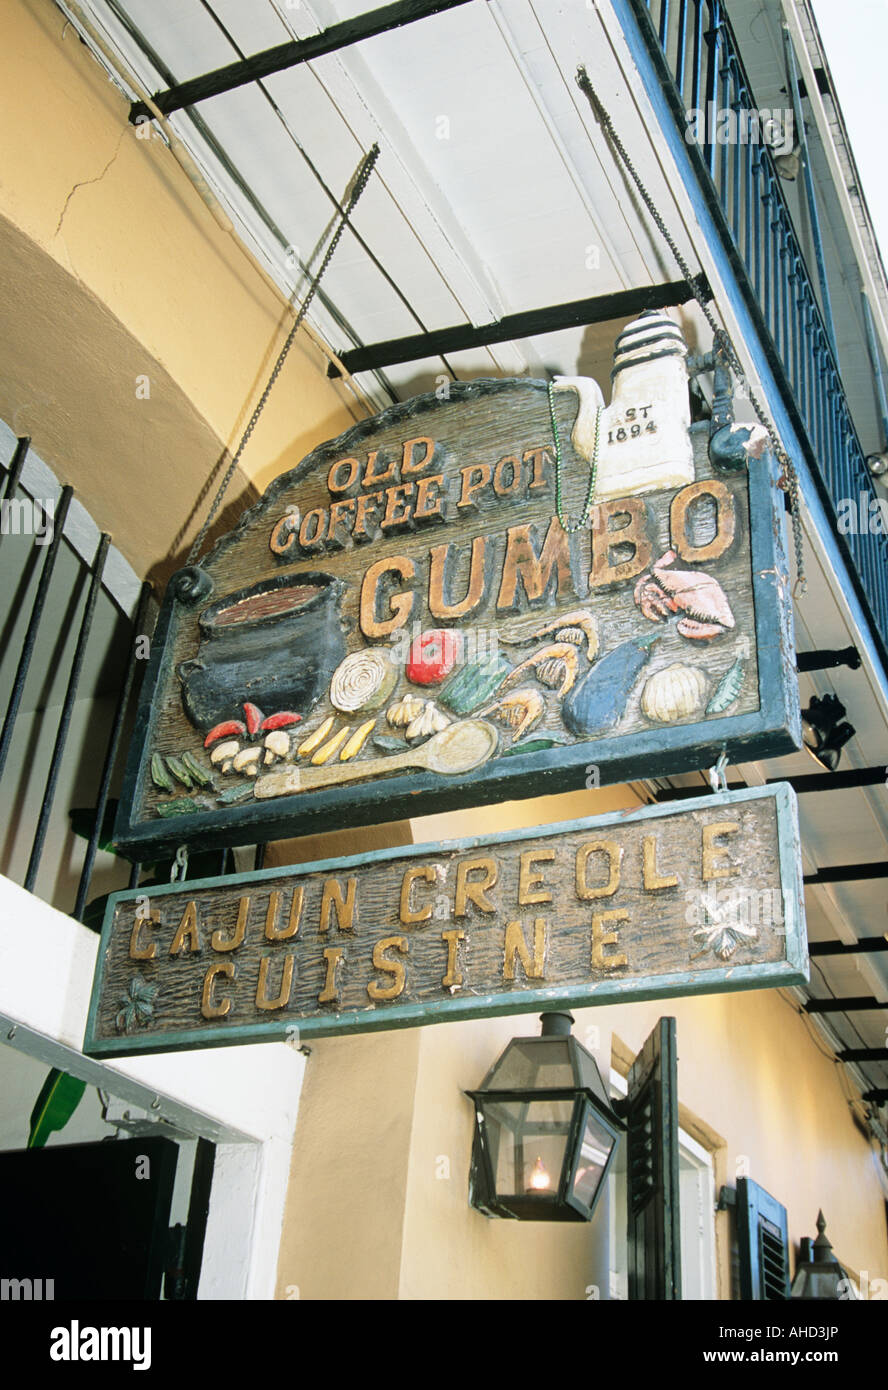 Old Coffee Pot Gumbo Restaurant sign, French Quarter, New Orleans,  Louisiana, USA Stock Photo - Alamy